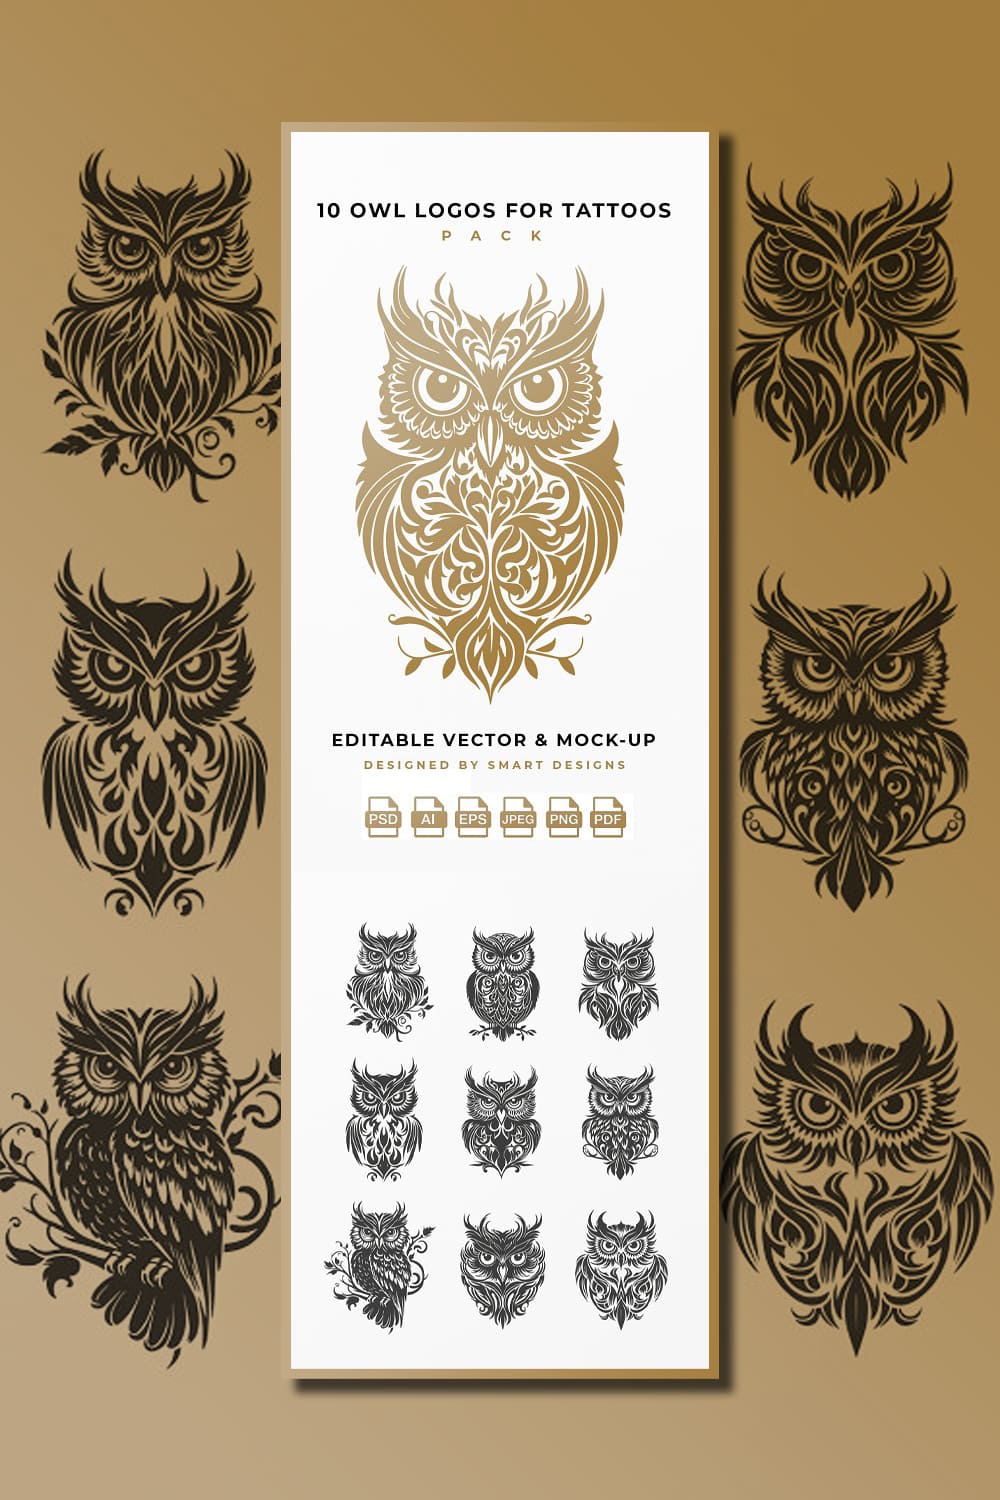 10 images of owls in beige and black color for tattoos.